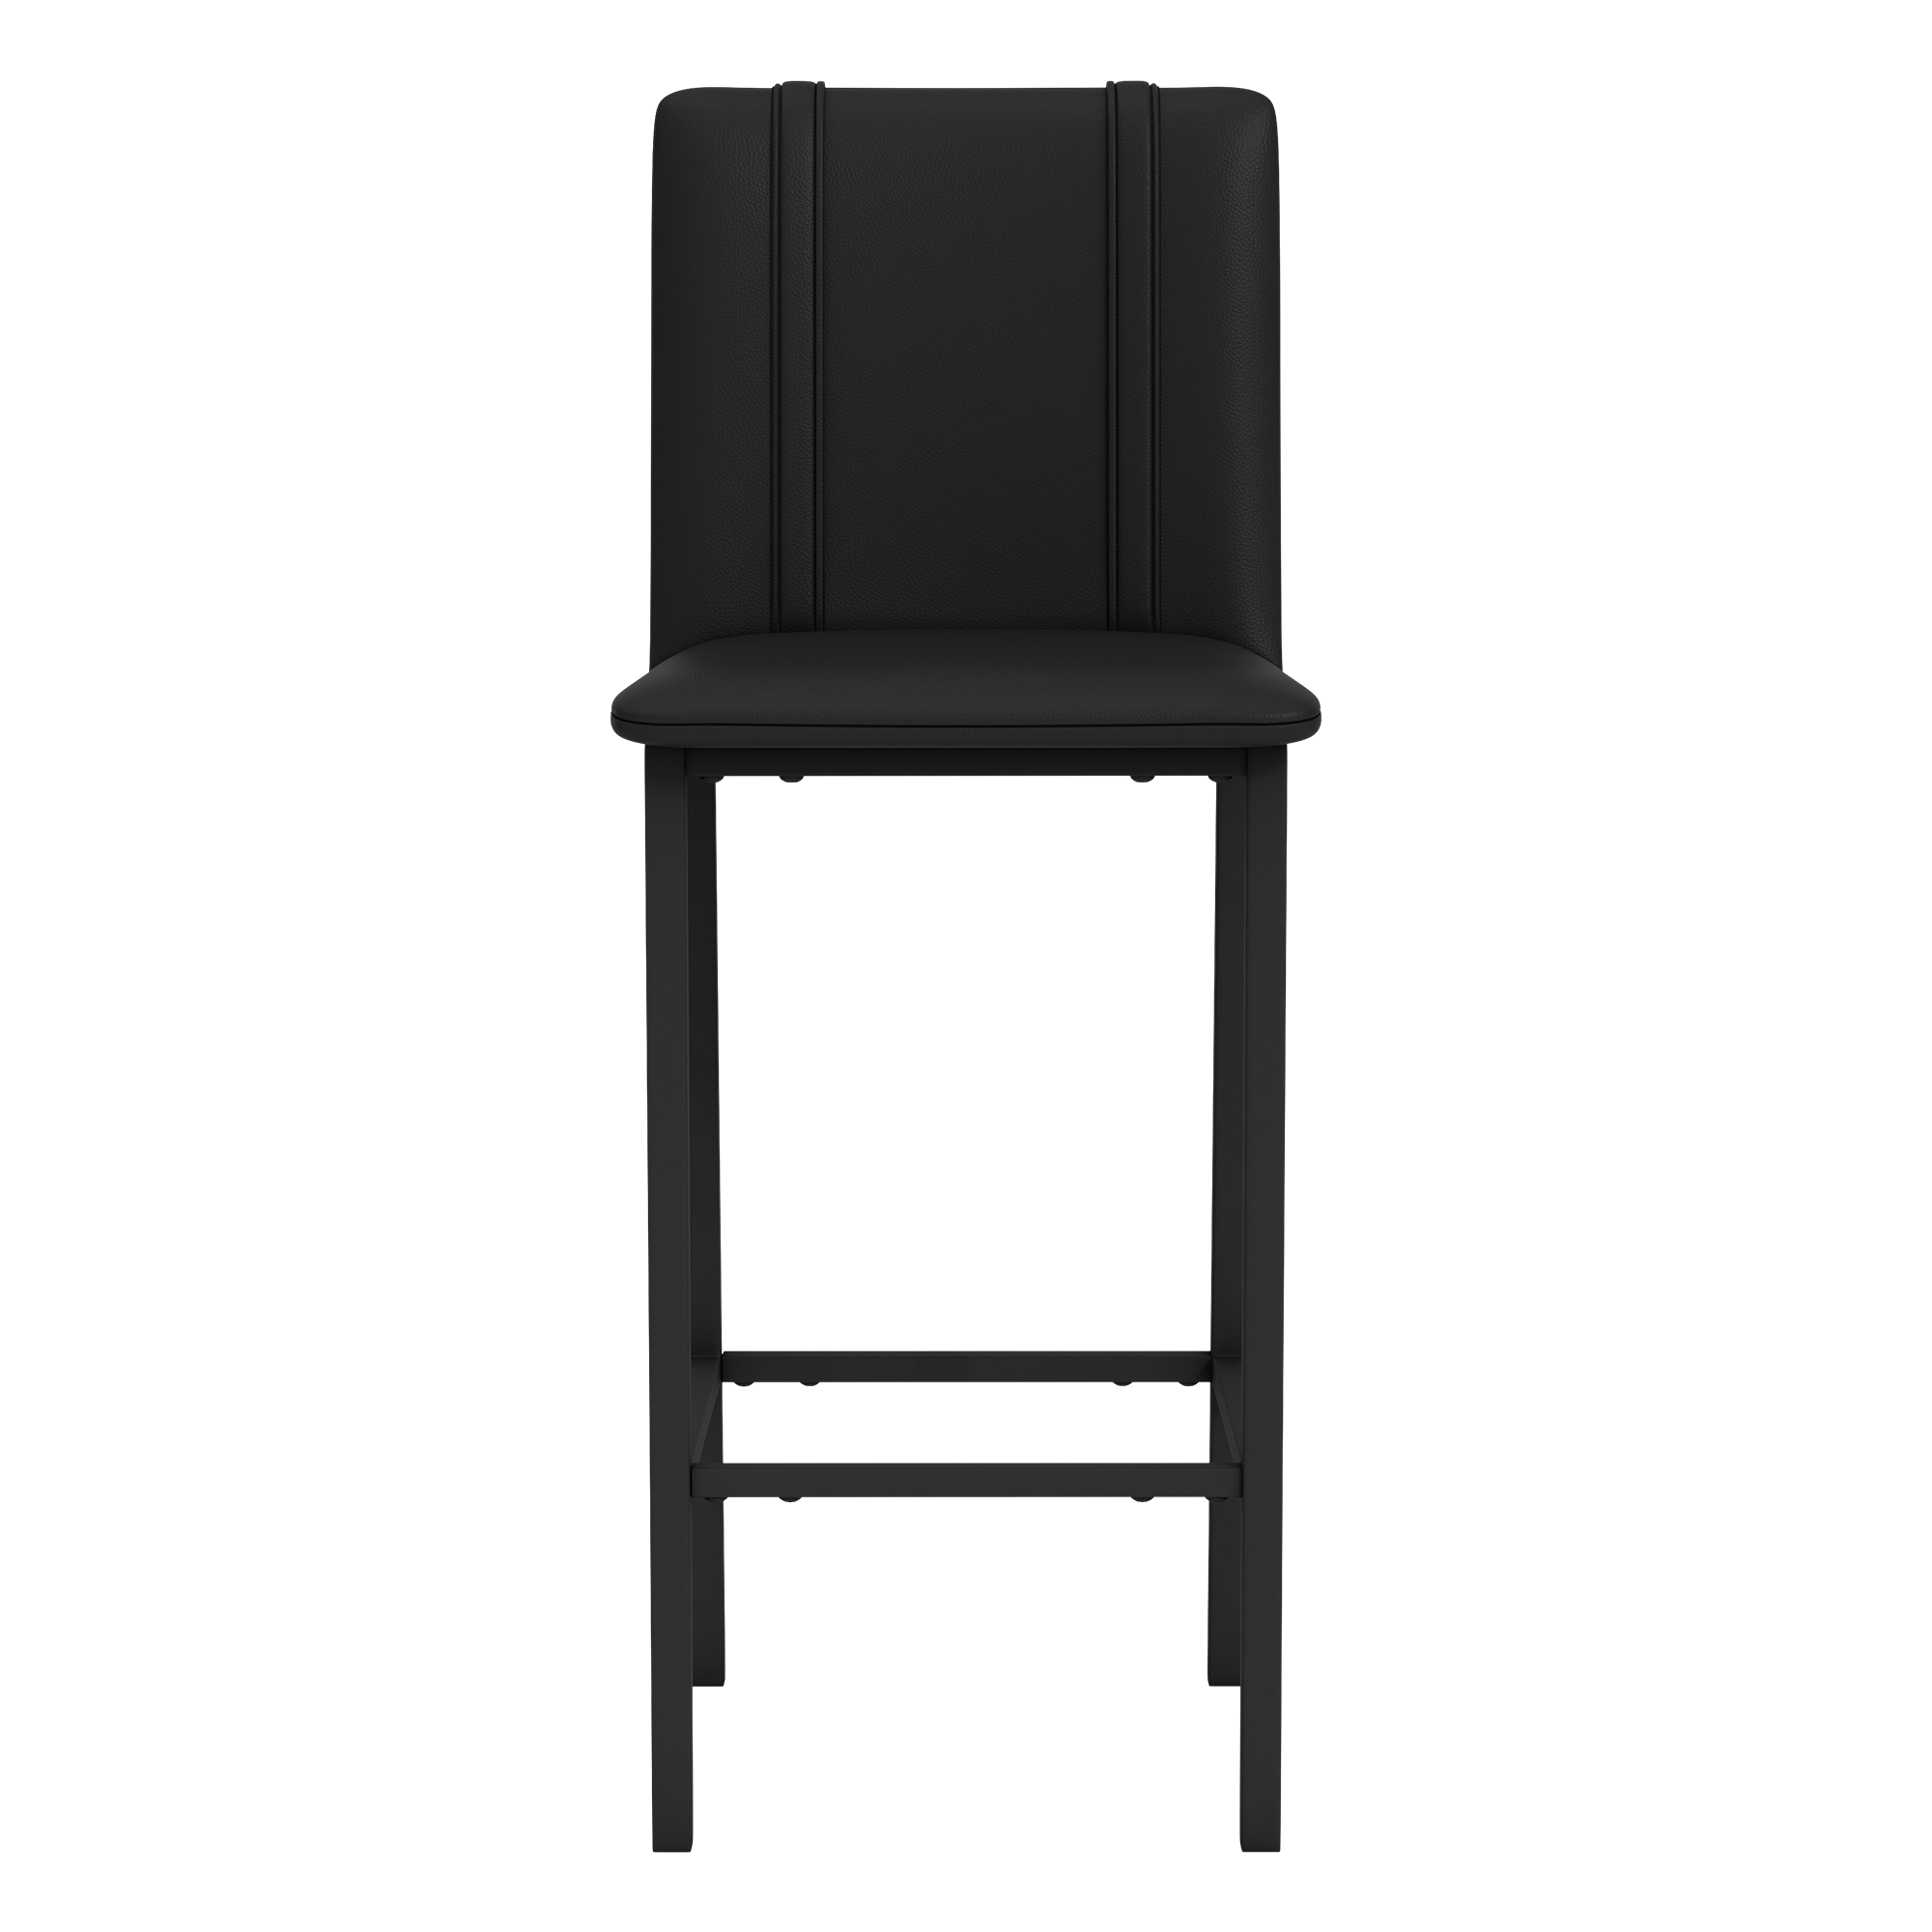 Bar Stool 500 with Baltimore Orioles Cooperstown Secondary Set of 2